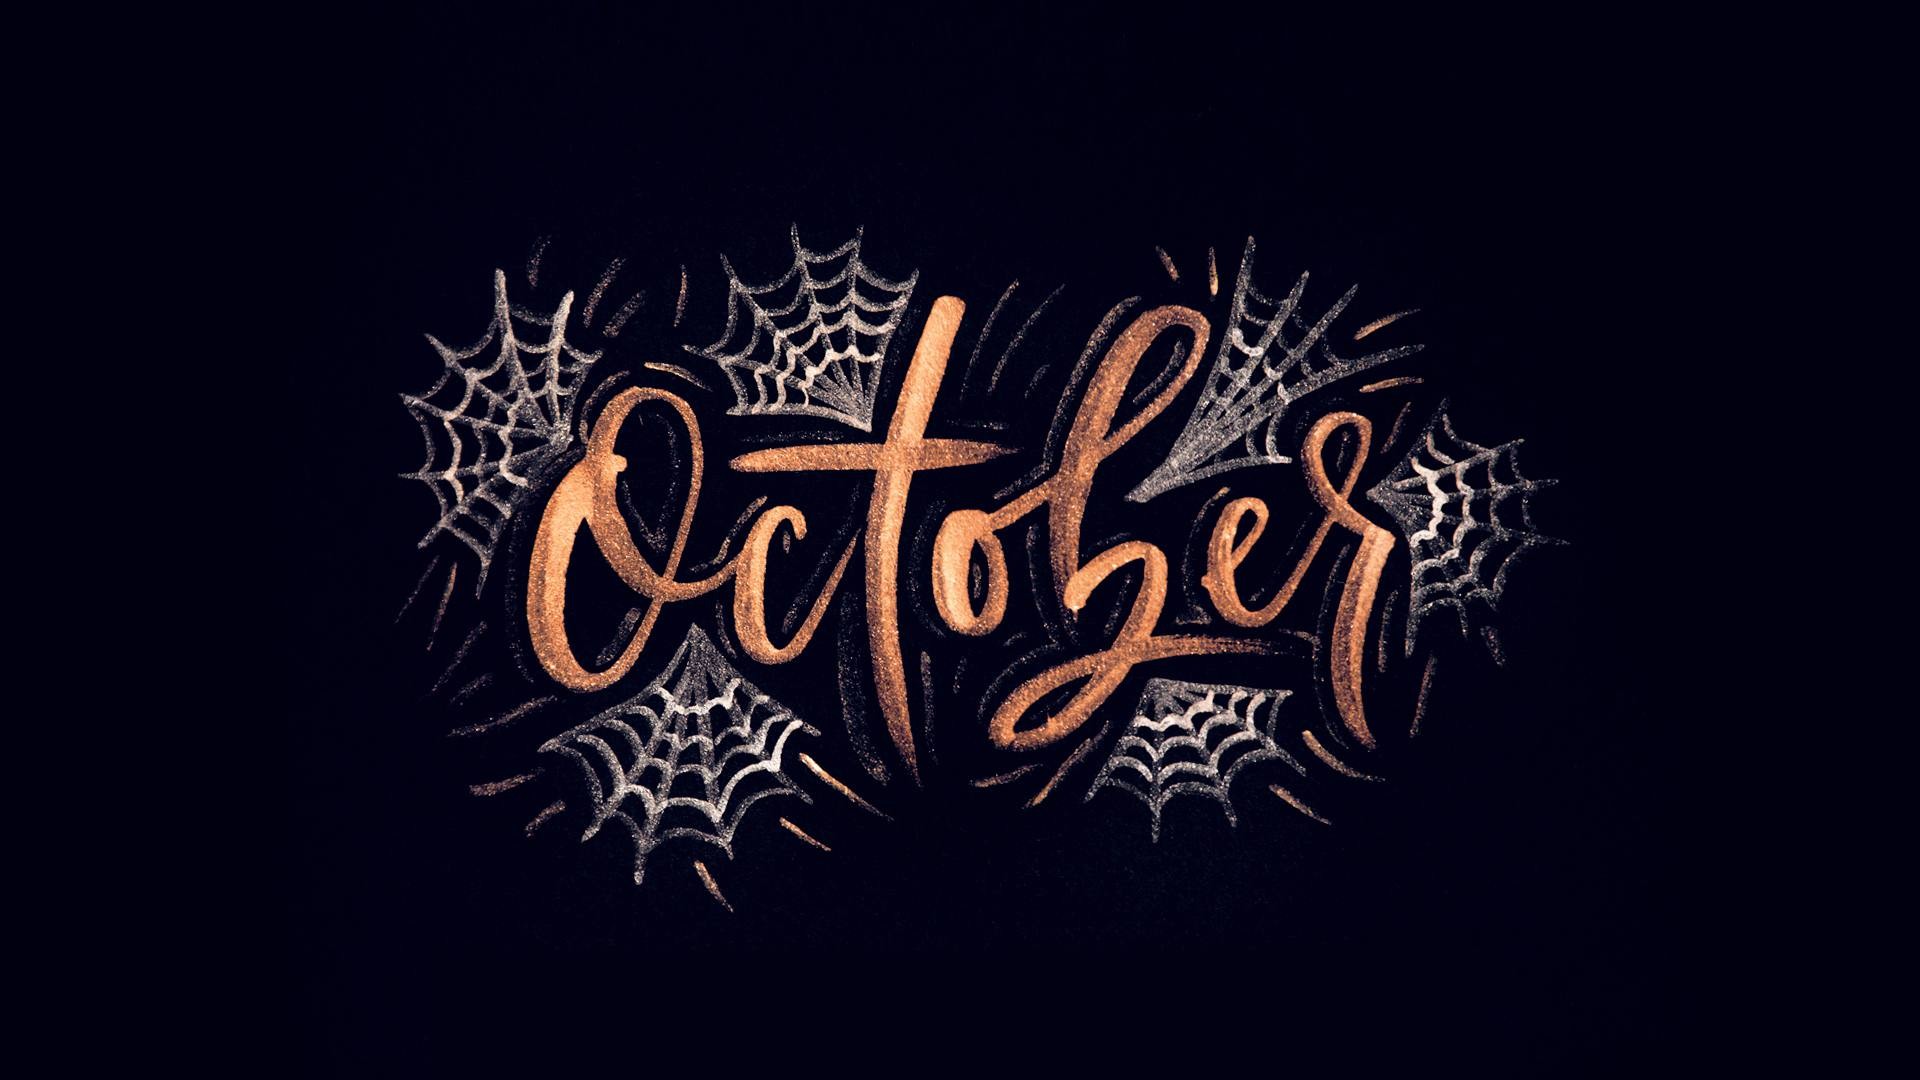 1920x1080 A black background with "October" and spider webs